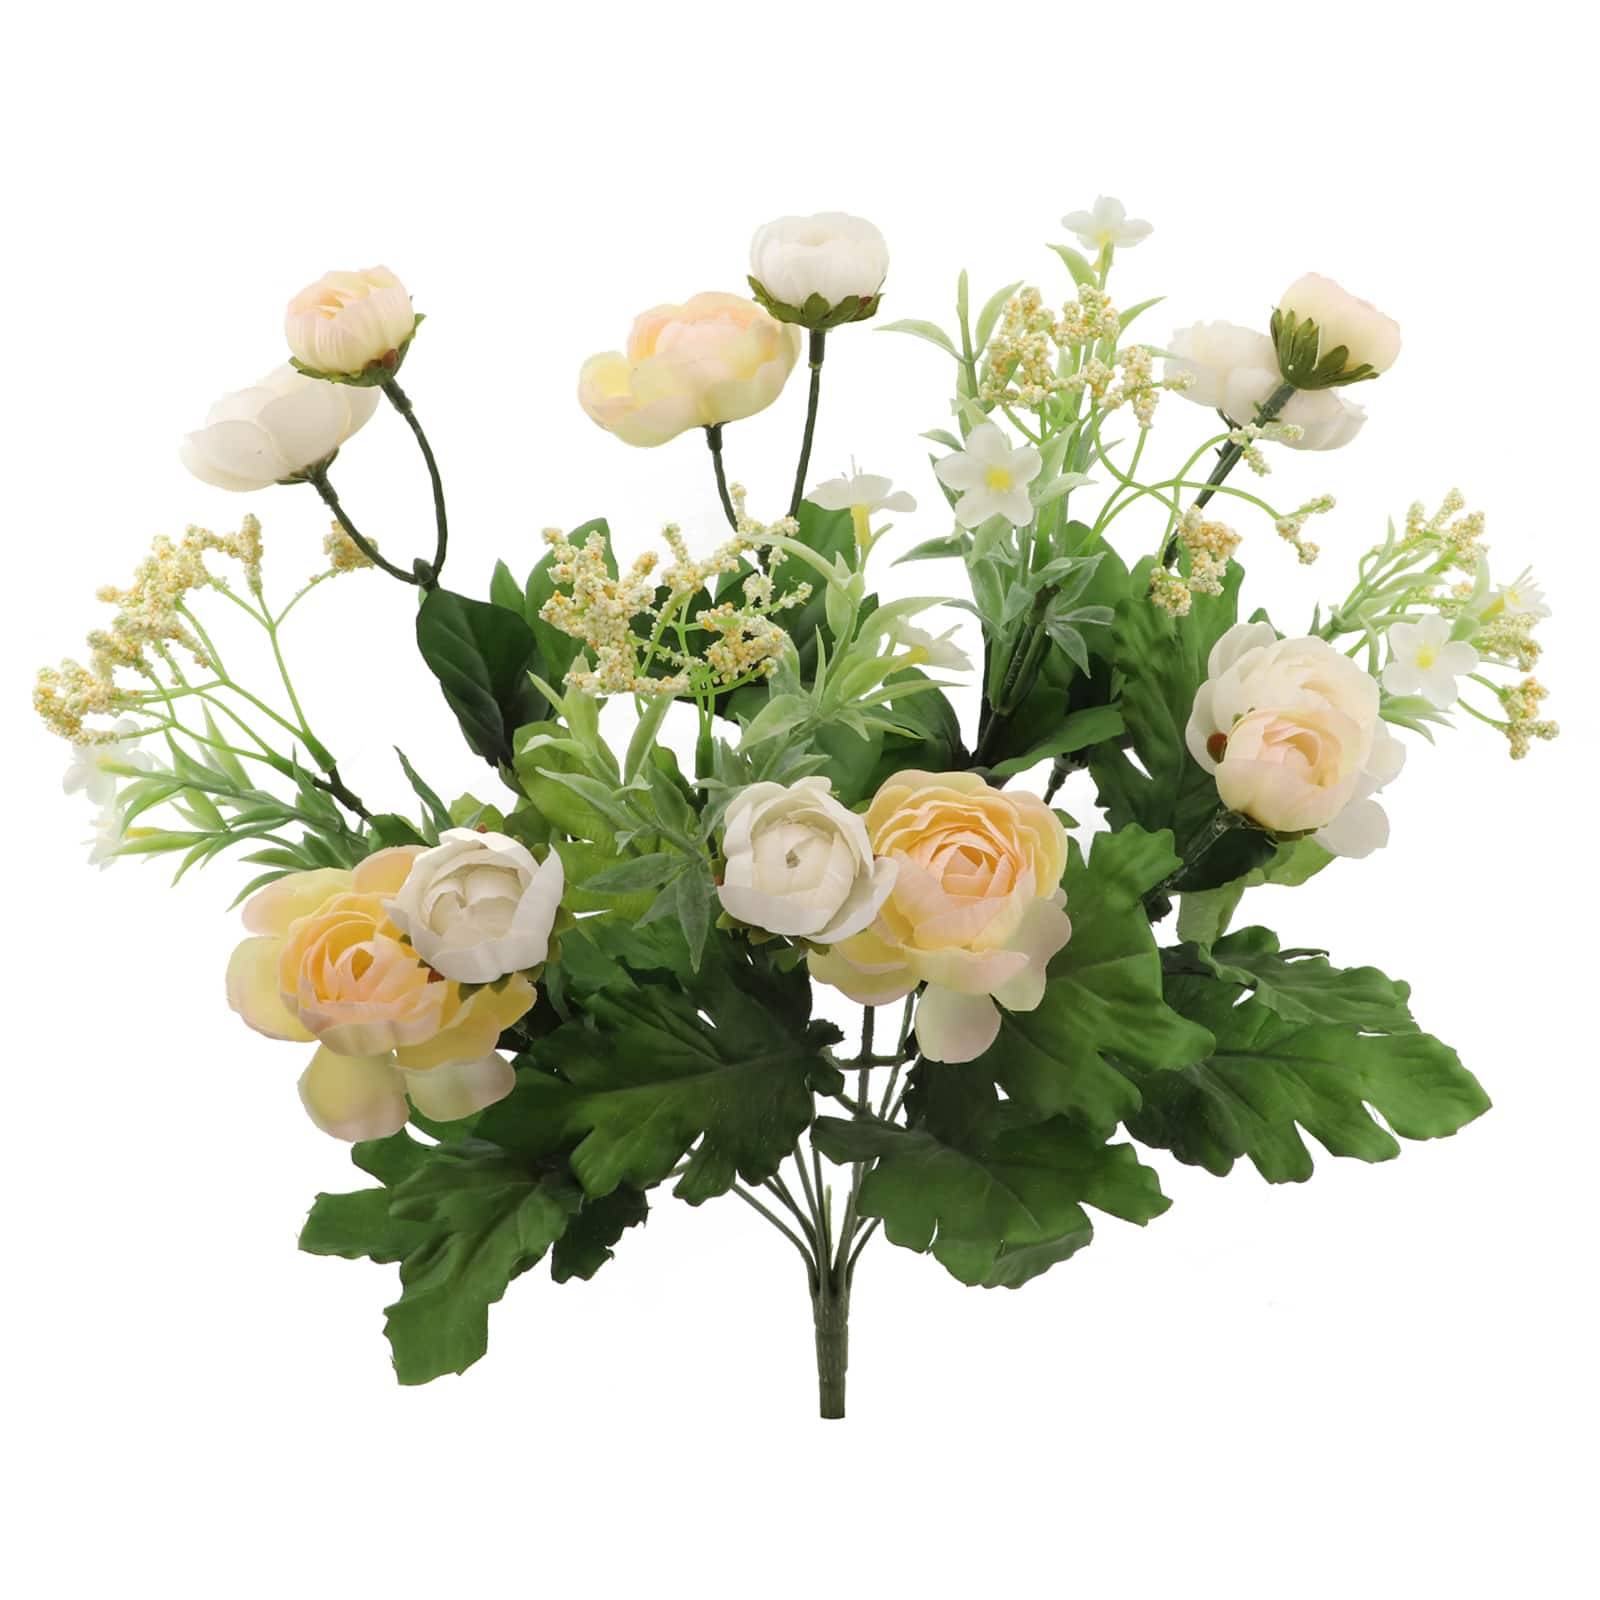 Buy the Beige Mixed Ranunculus Bush by Ashland® at Michaels